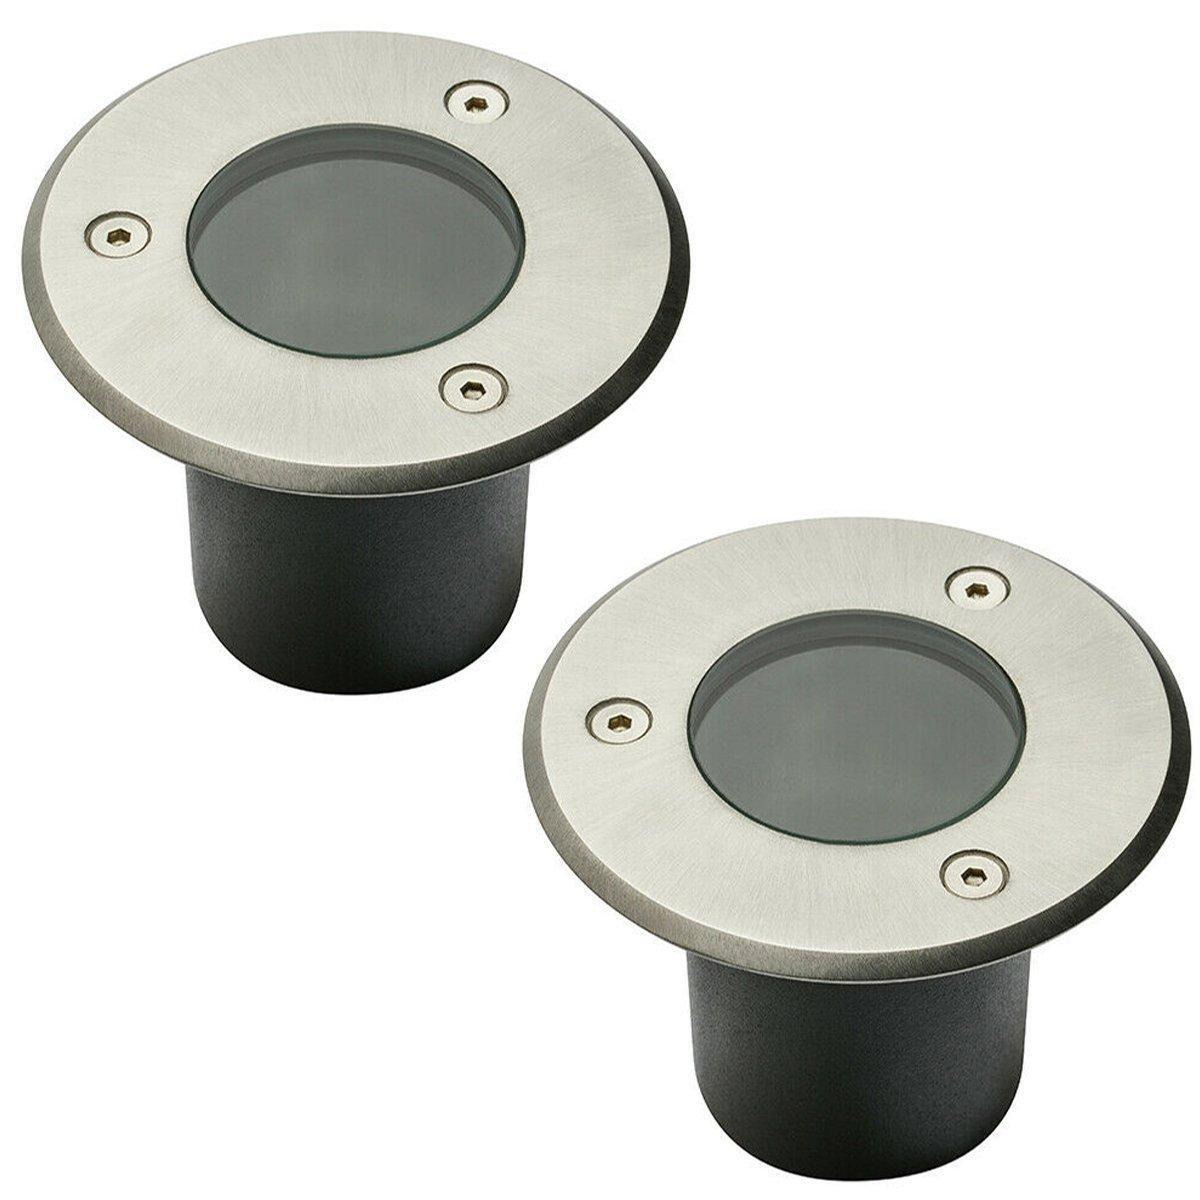 Nola Two Round Small Stainless Steel Inground Or Decking Lights - image 1